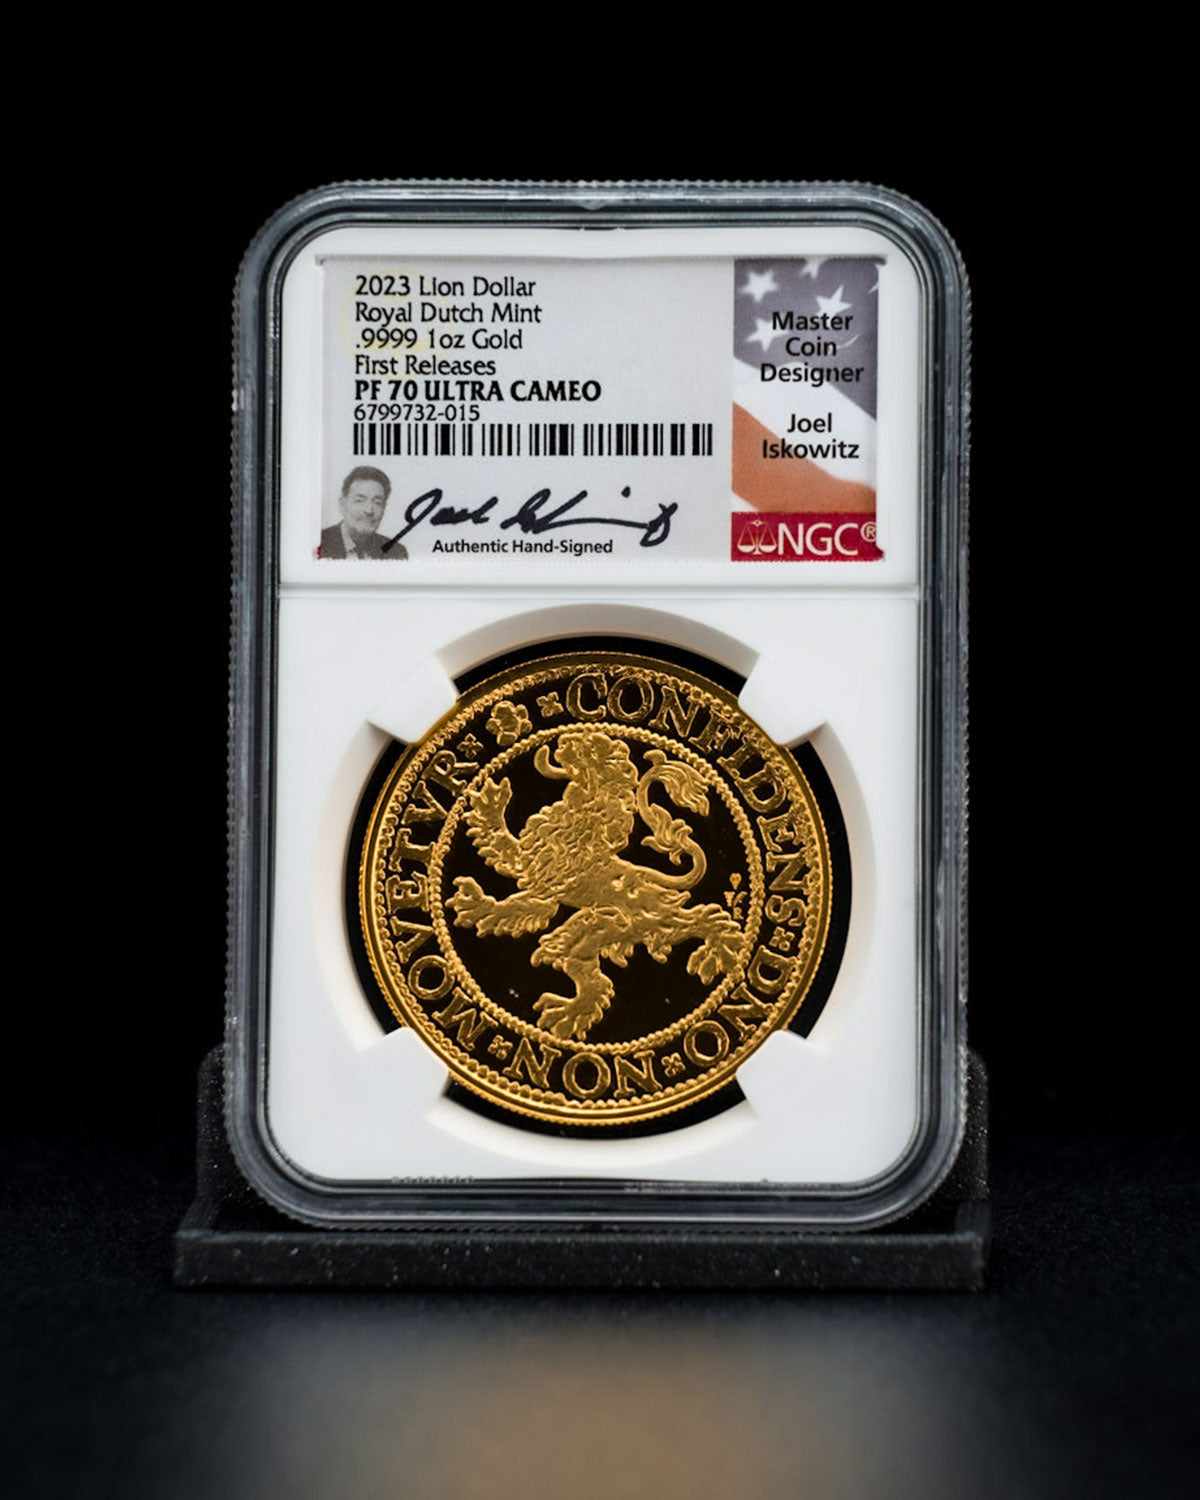 2023 1oz Gold Lion Dollar Royal Dutch Mint | First Releases PF70 Ultra Cameo | Joel Iskowitz Autographed